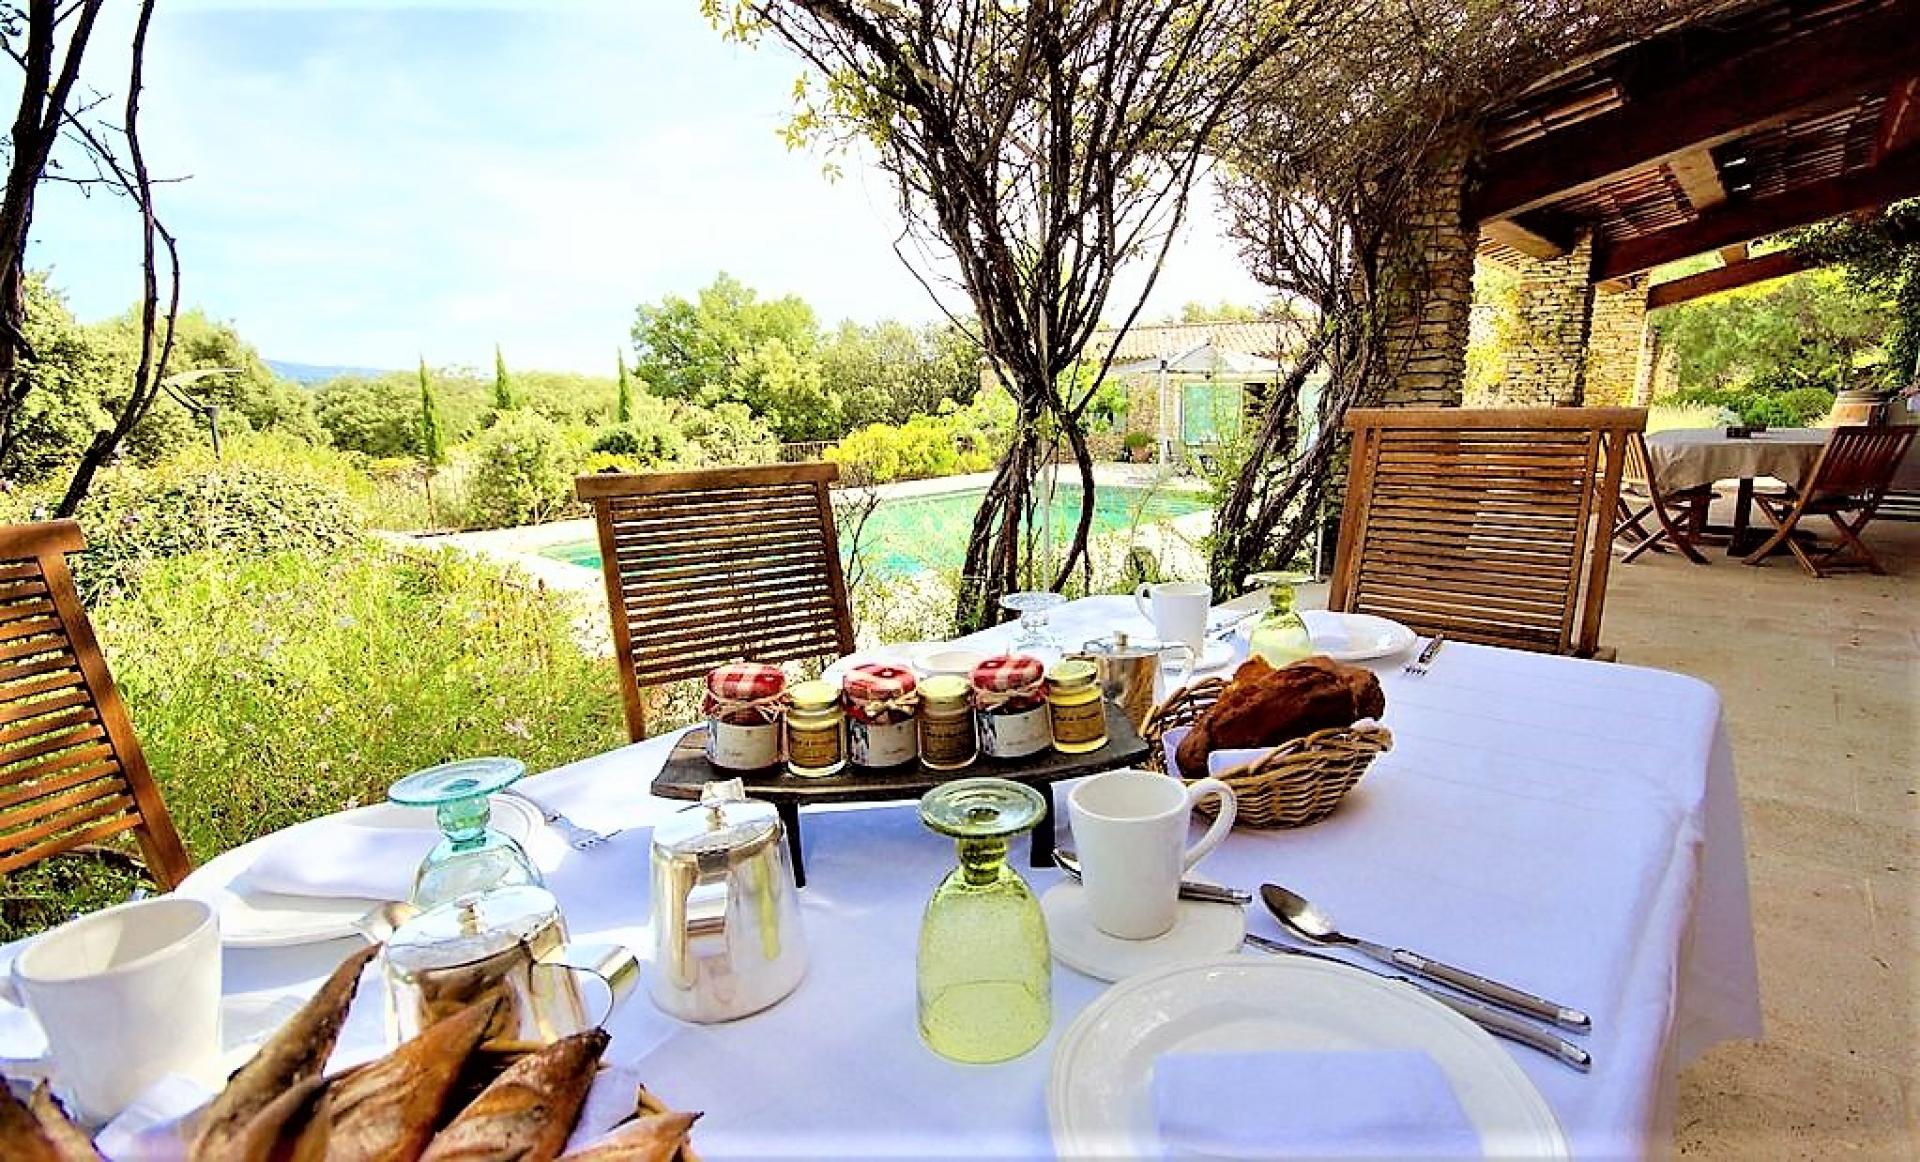 BREAKFASTS CAN BE SERVED EVERY MORNING  IN LA VILLA ANGELE HOLIDAY RENTAL IN LUBERON PROVENCE